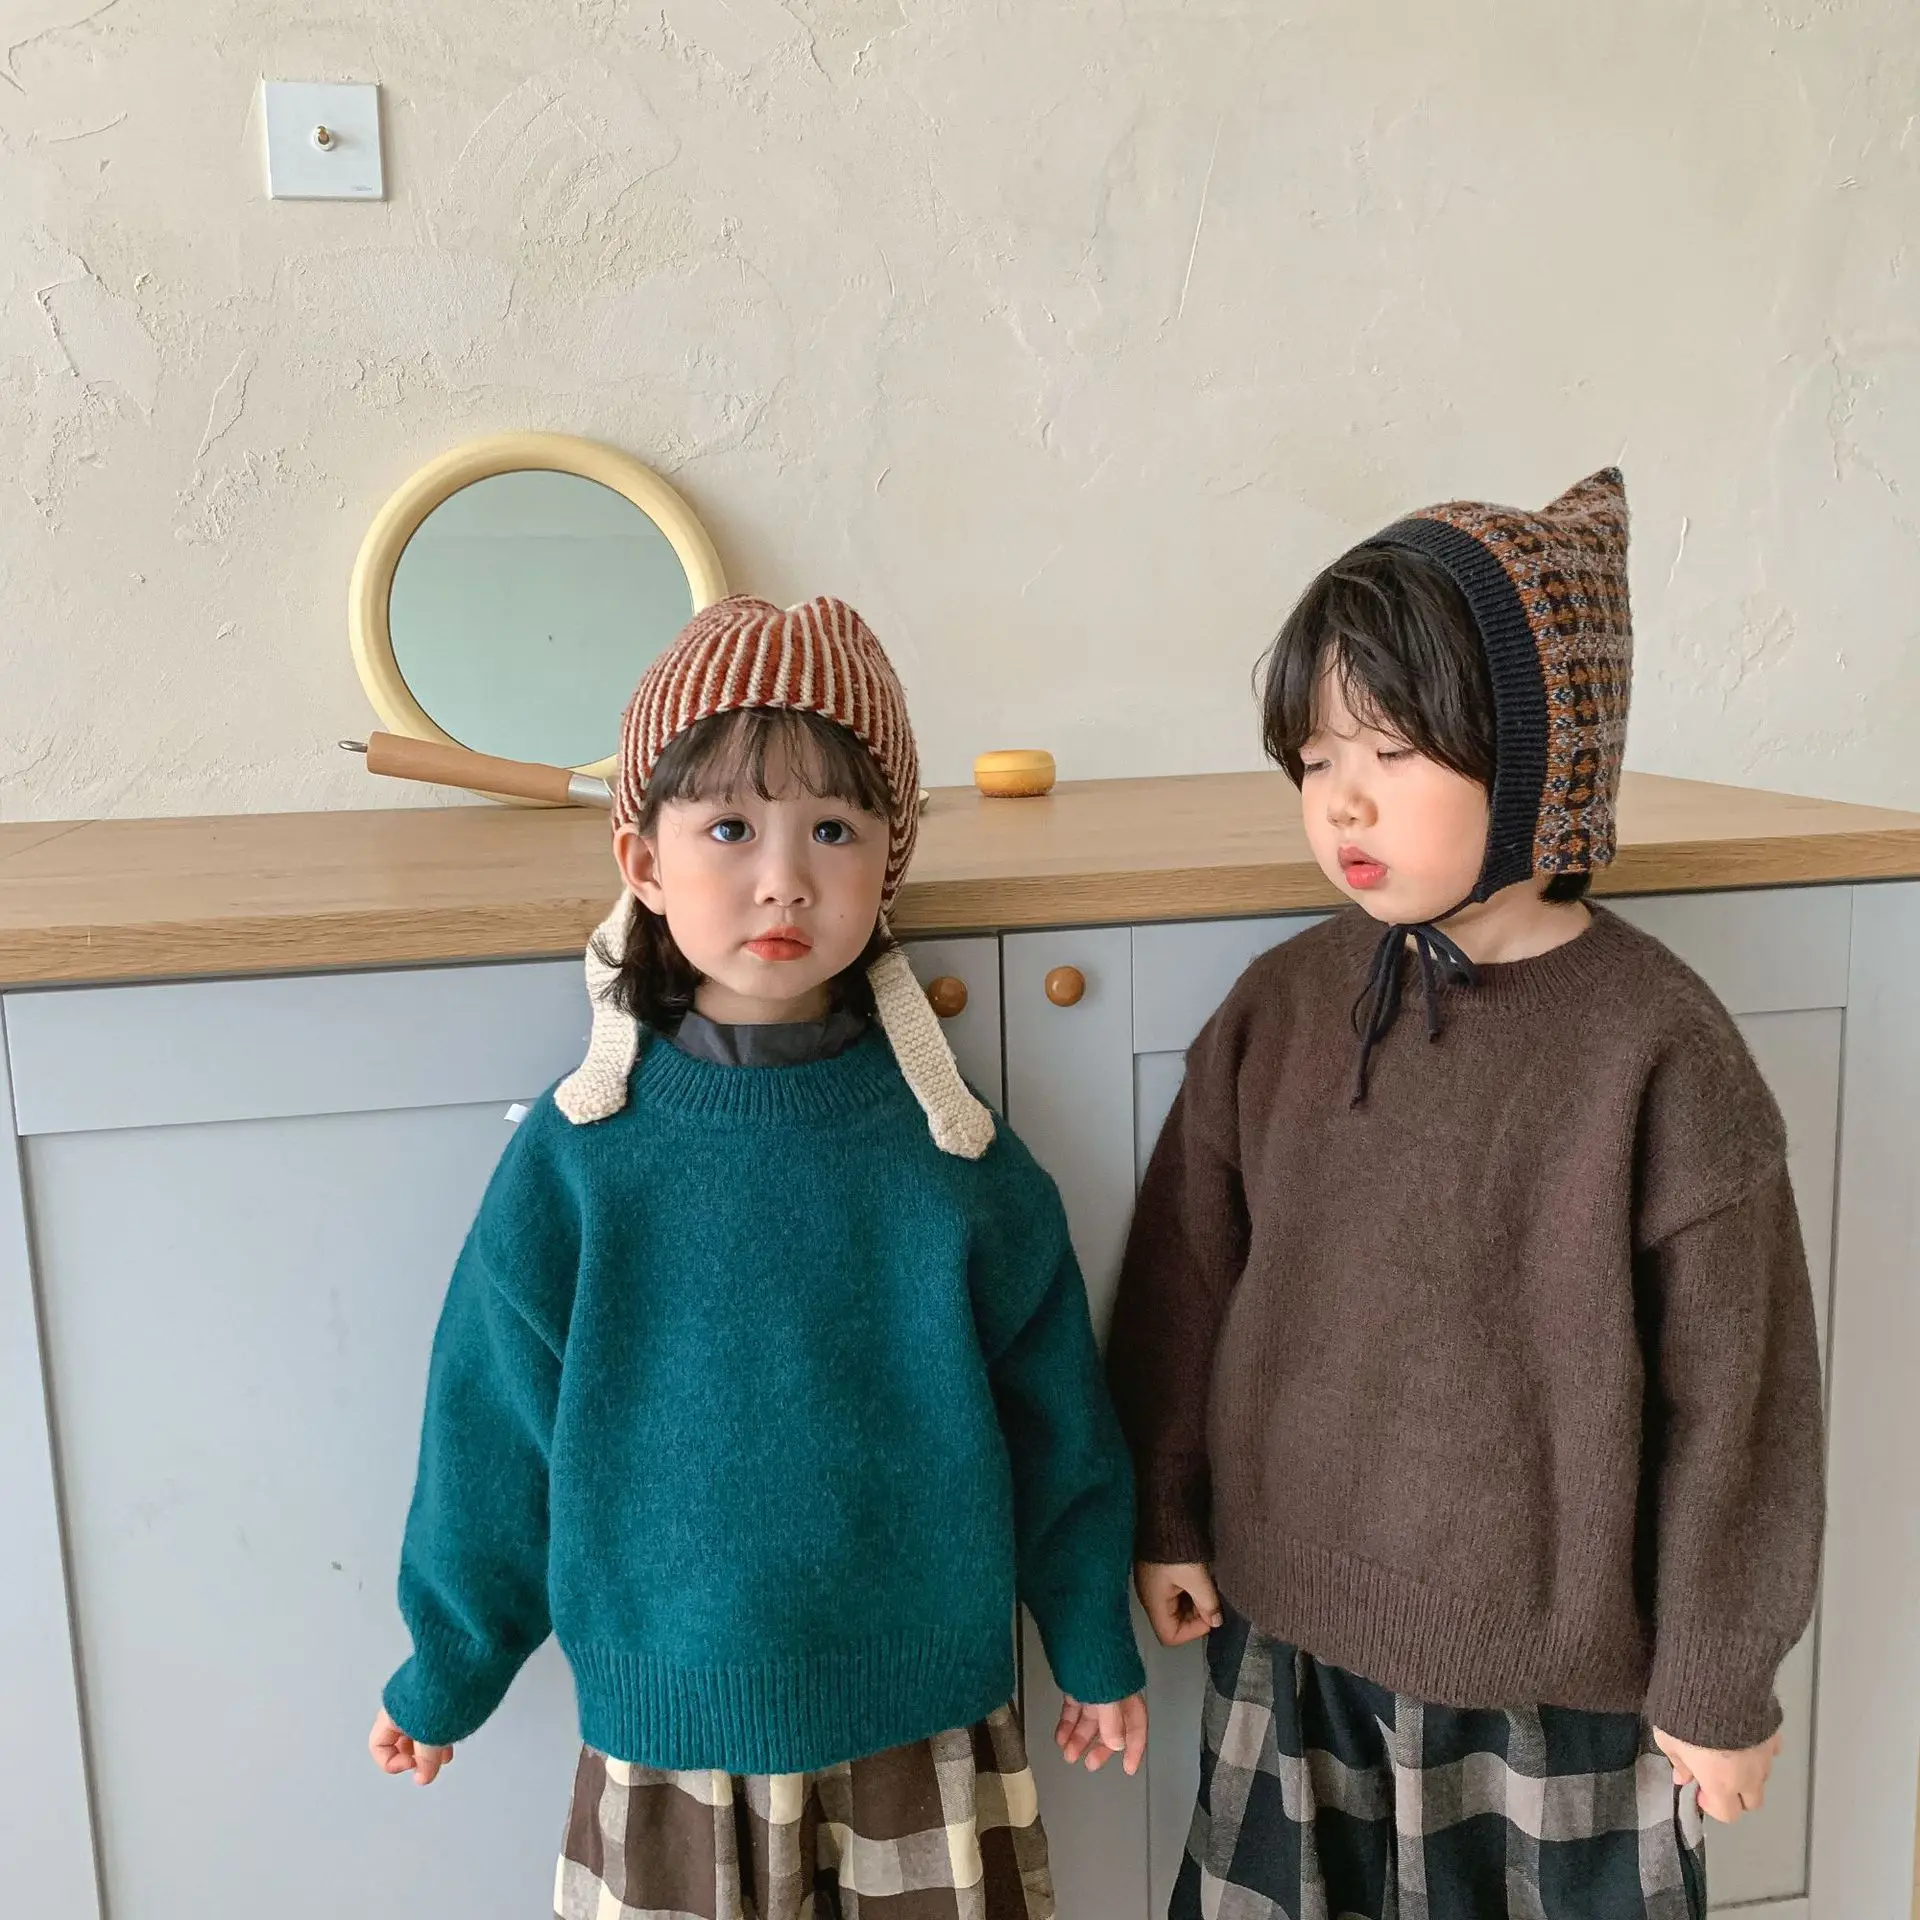 

Winter New styles boys and girls knitted warm base sweaters 4 colors unisex casual all-match sweater 1-6Y